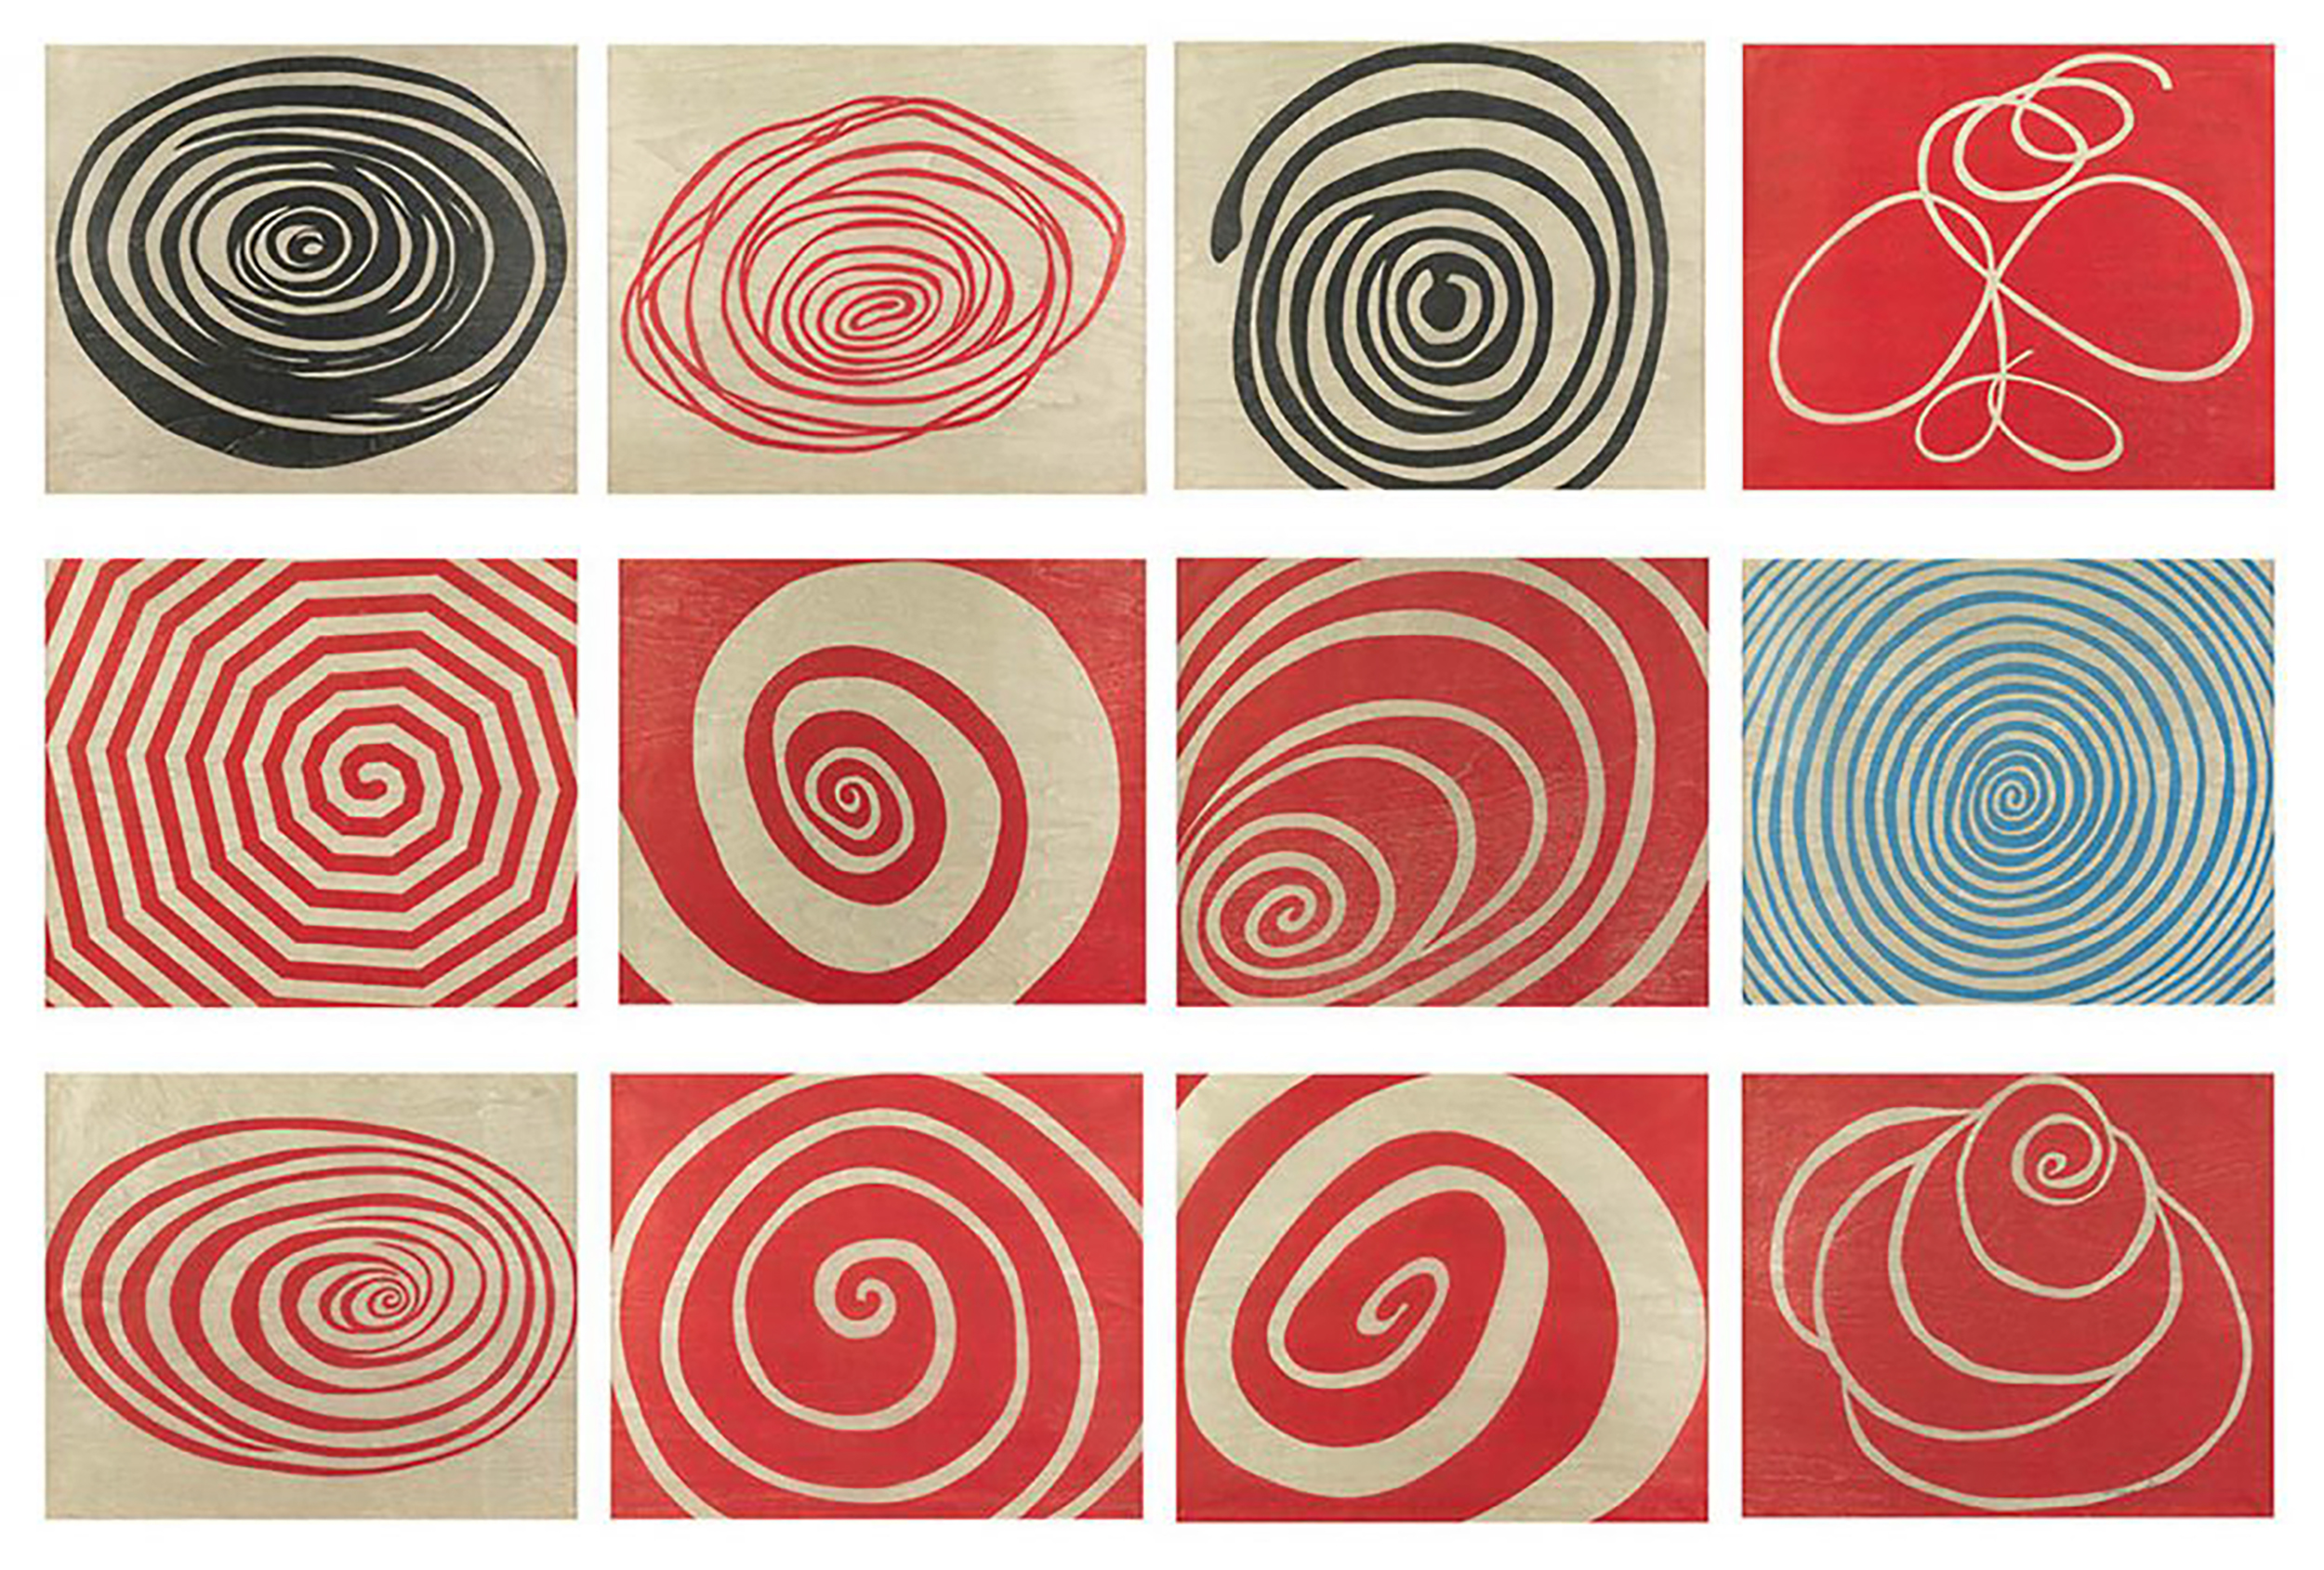 Exploring the Artistry of Louise Bourgeois through Captivating Posts